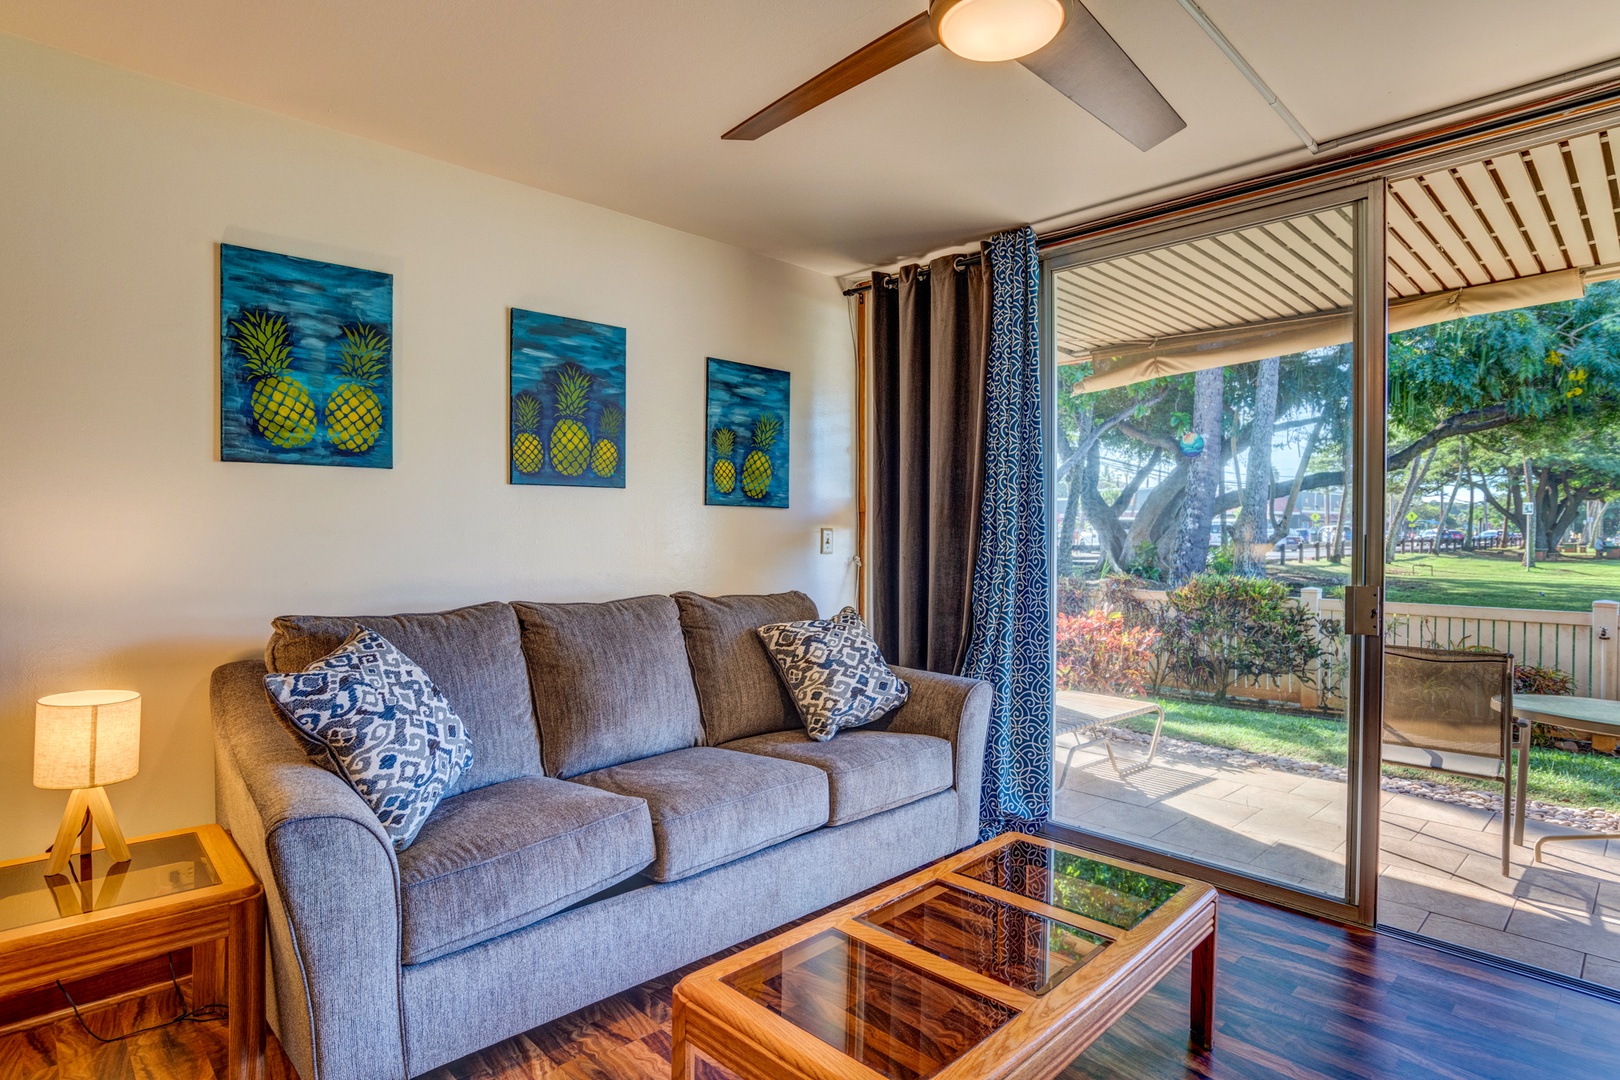 Lahaina Vacation Rentals, Hale Kai 109 - Sleeper sofa for a total guest count of 4